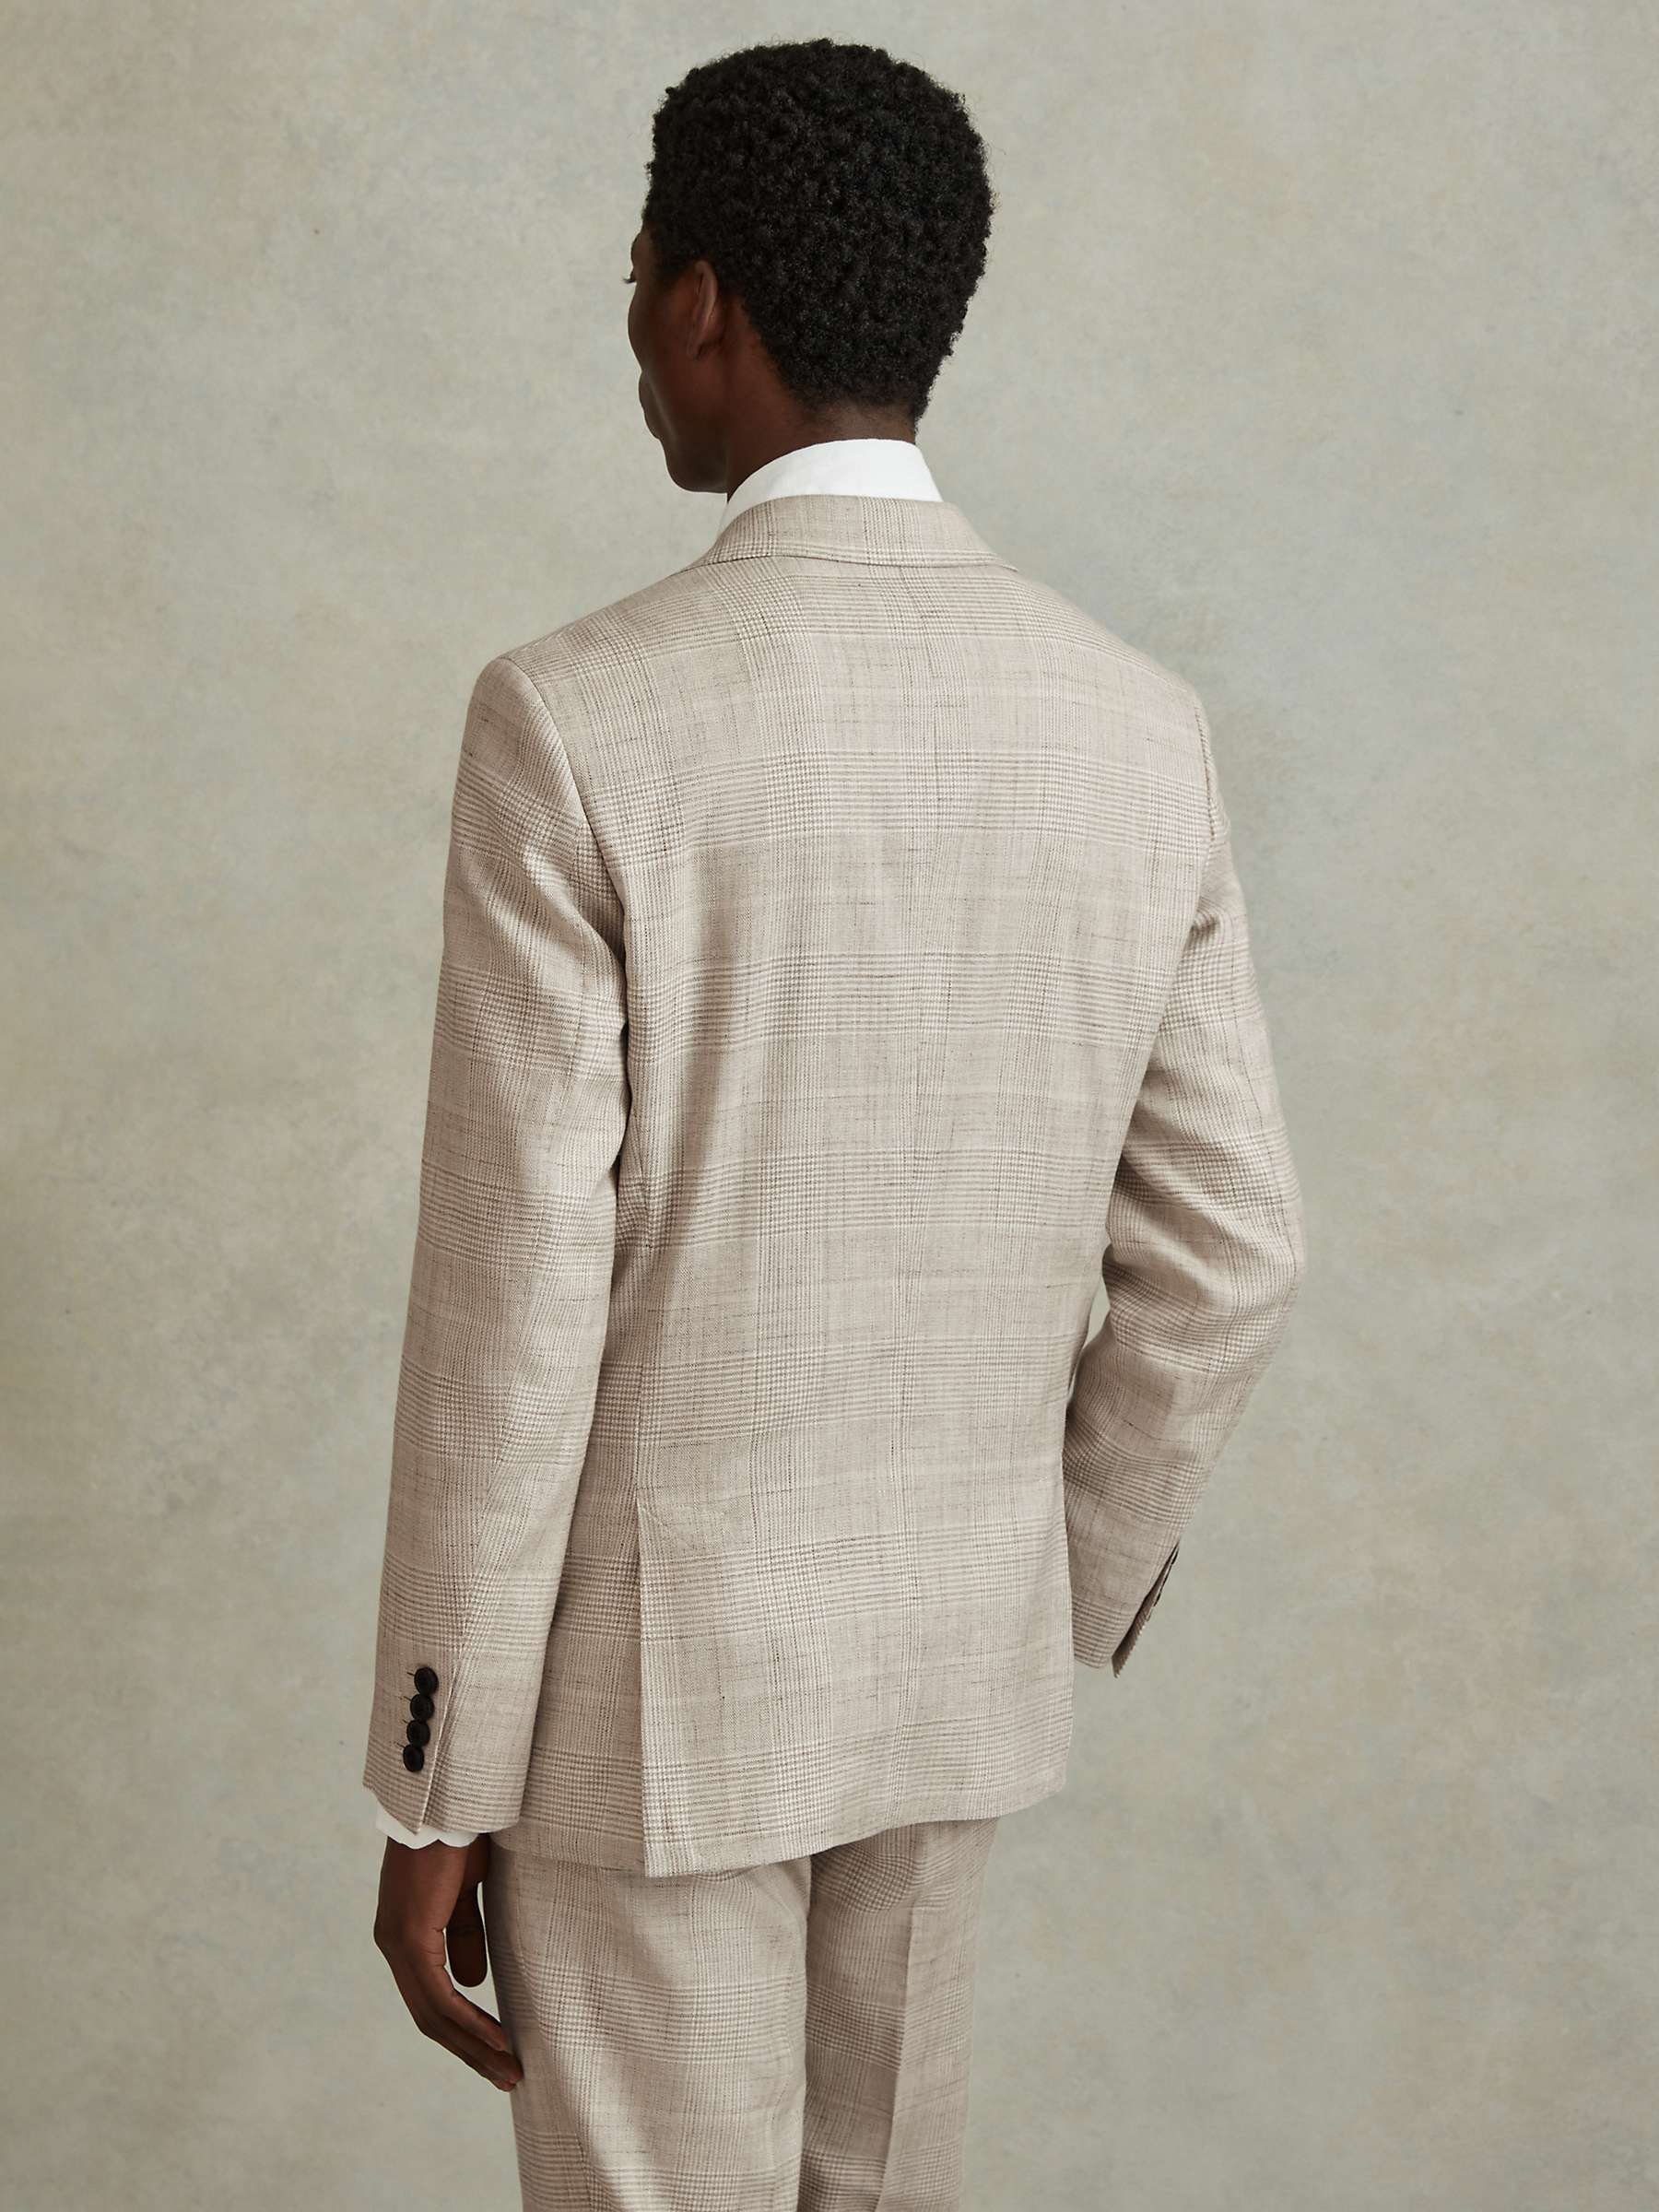 Buy Reiss Boxhill Linen Blend Tailored Fit Suit Jacket, Oatmeal Online at johnlewis.com